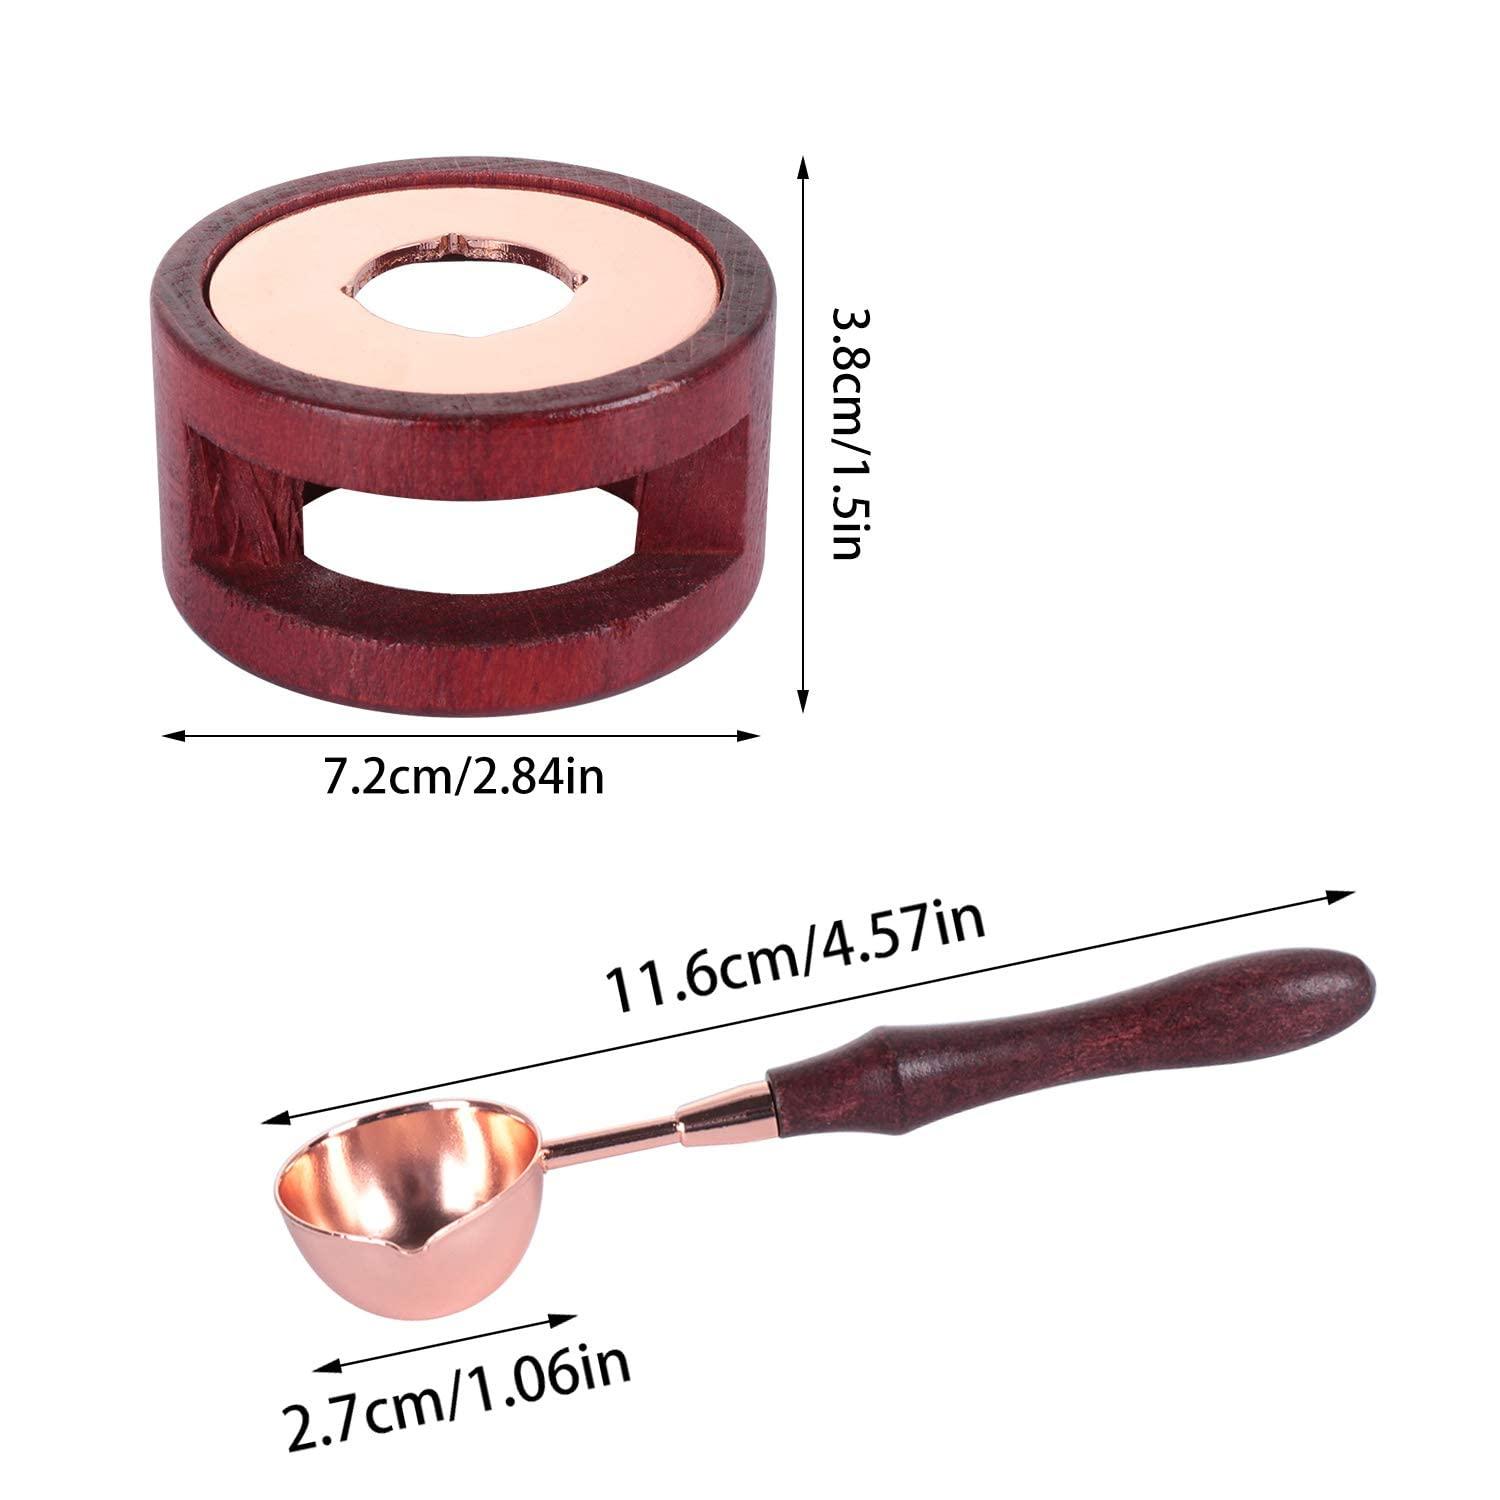 Large Sealing Wax Melting Spoon - High Quality Wax Seal Accessory